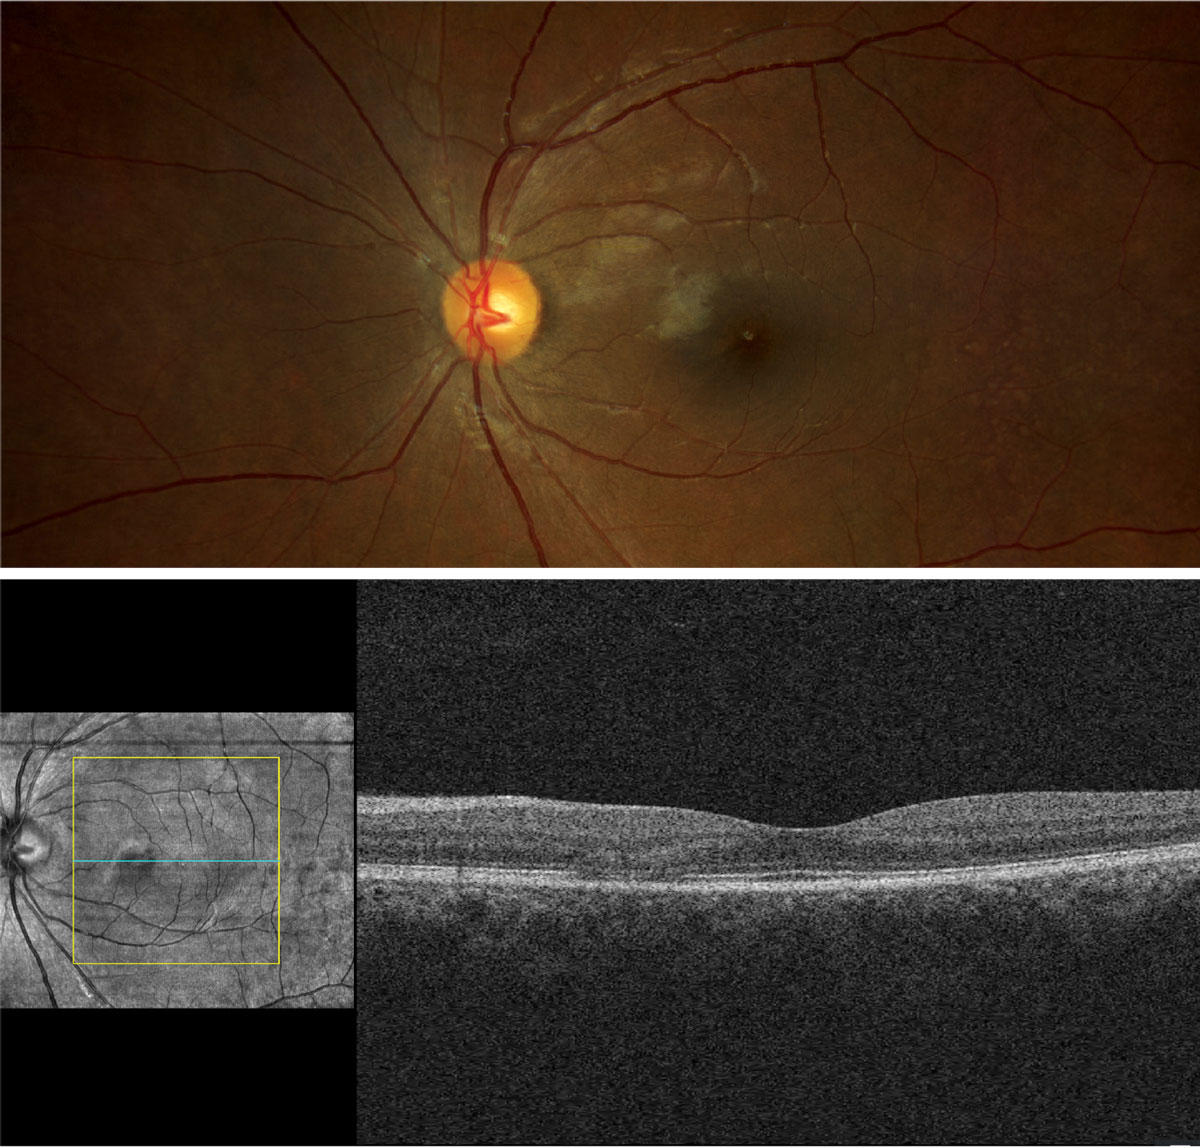 Does the appearance of the retina confirm any suspicions raised by the case history?